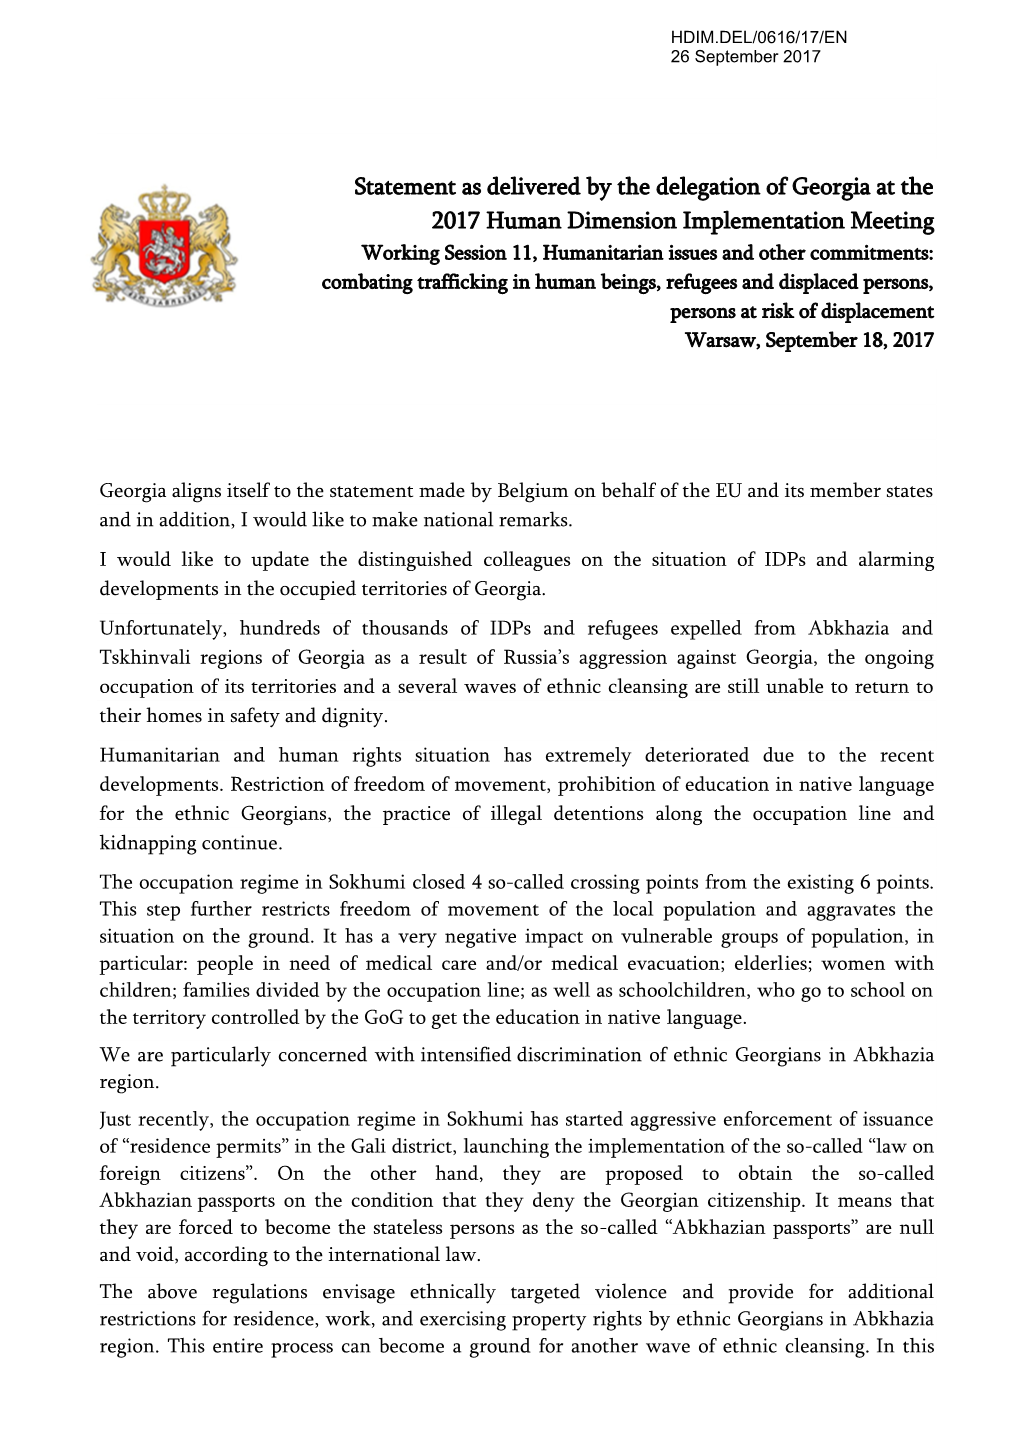 Statement As Delivered by the Delegation of Georgia at the 2017 Human Dimension Implementation Meeting